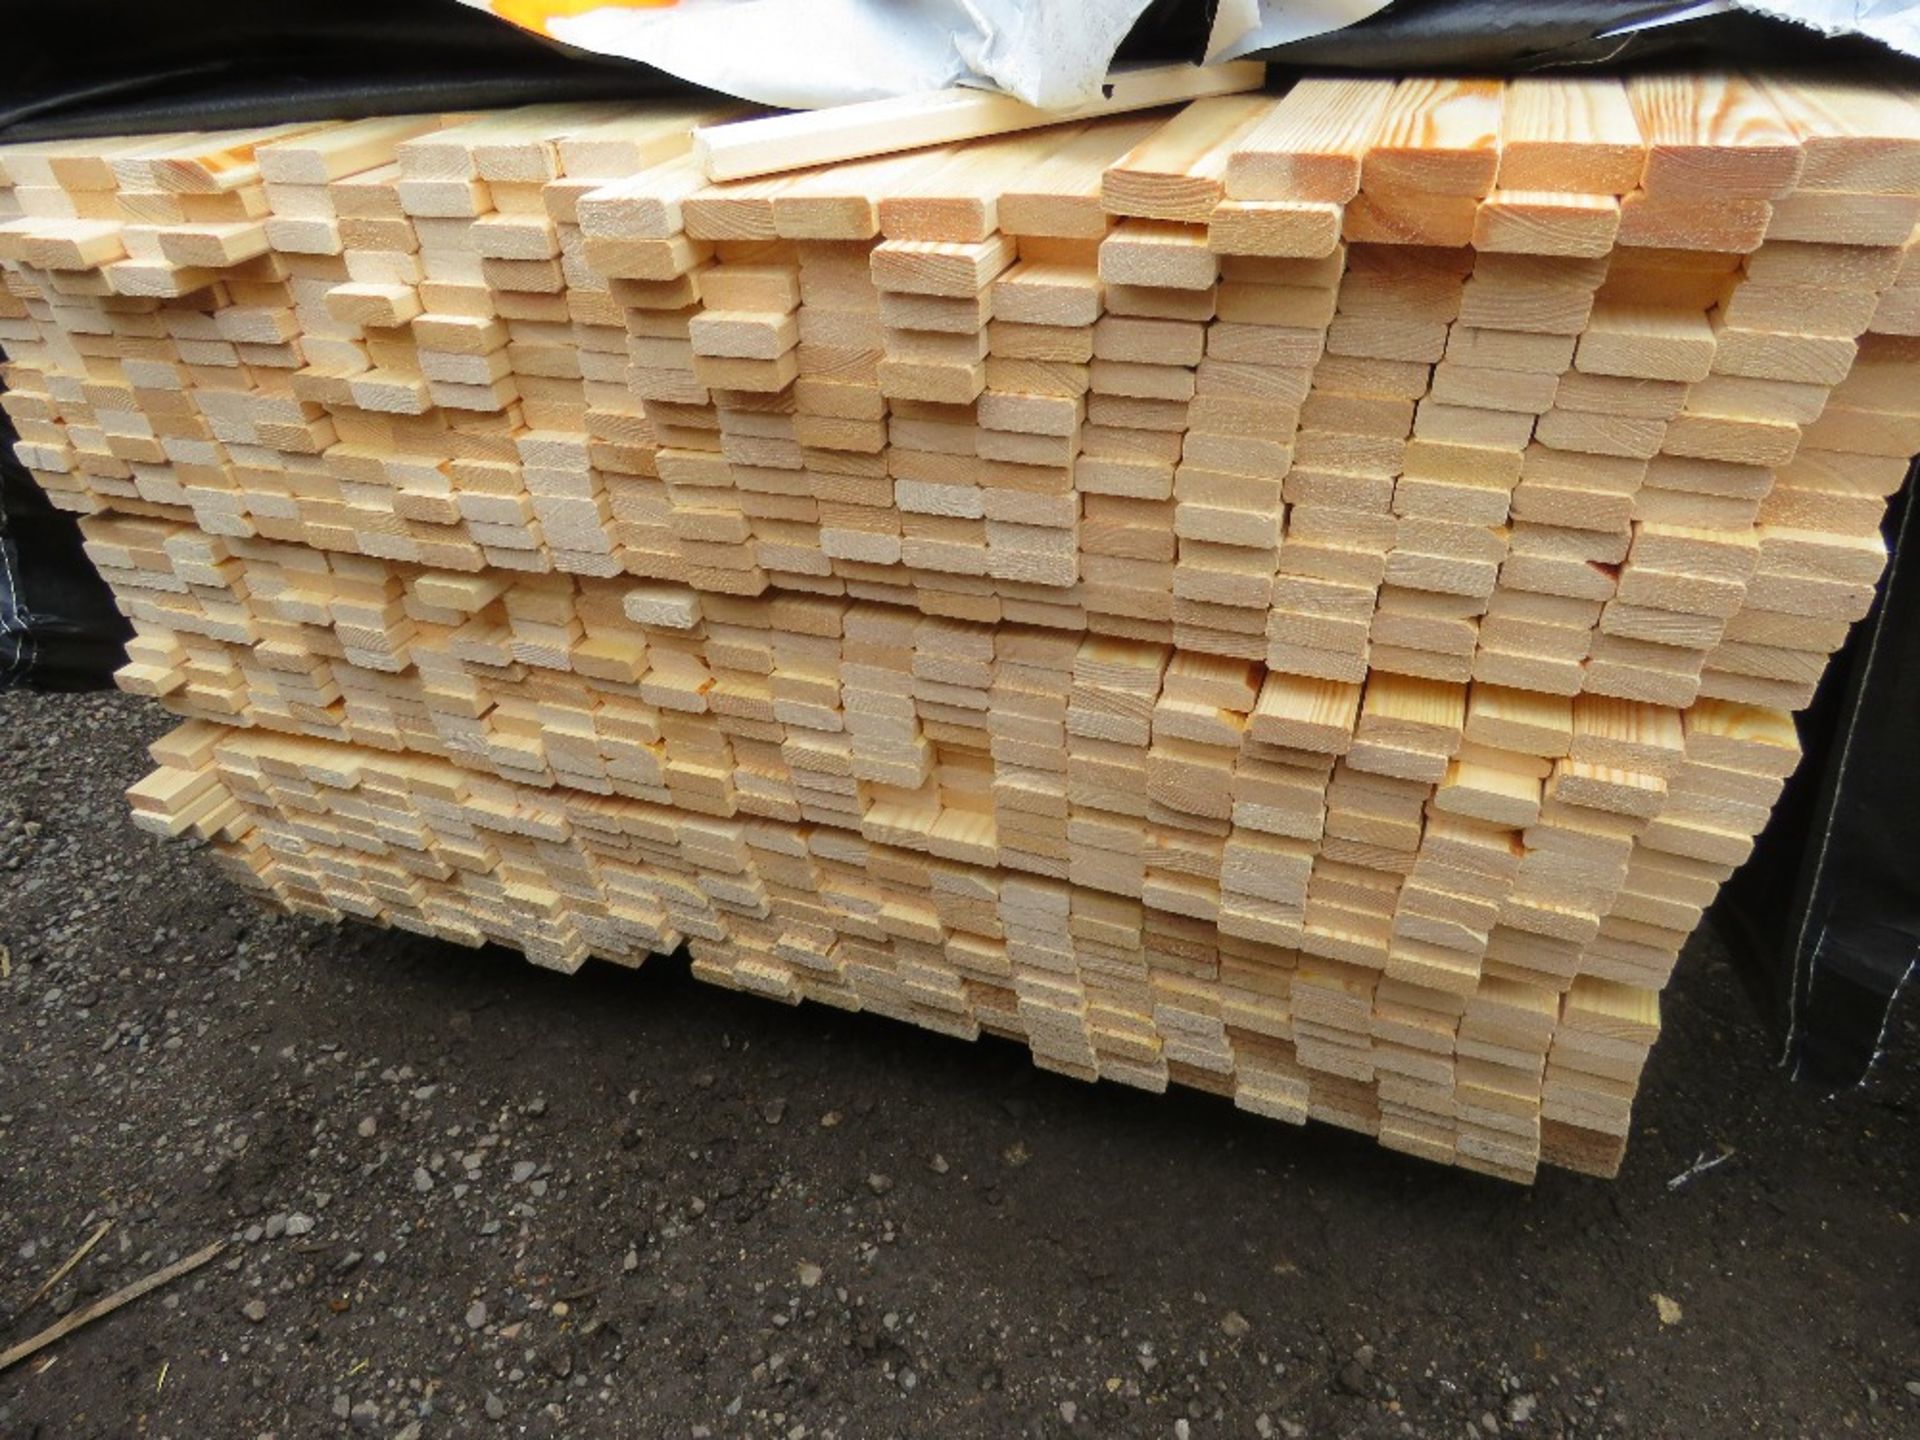 PACK OF UNTREATED VENETIAN FENCE / TRELLIS TIMBER SLATS 1.4M LENGTH X 45MM X 17MM APPROX. - Image 2 of 3